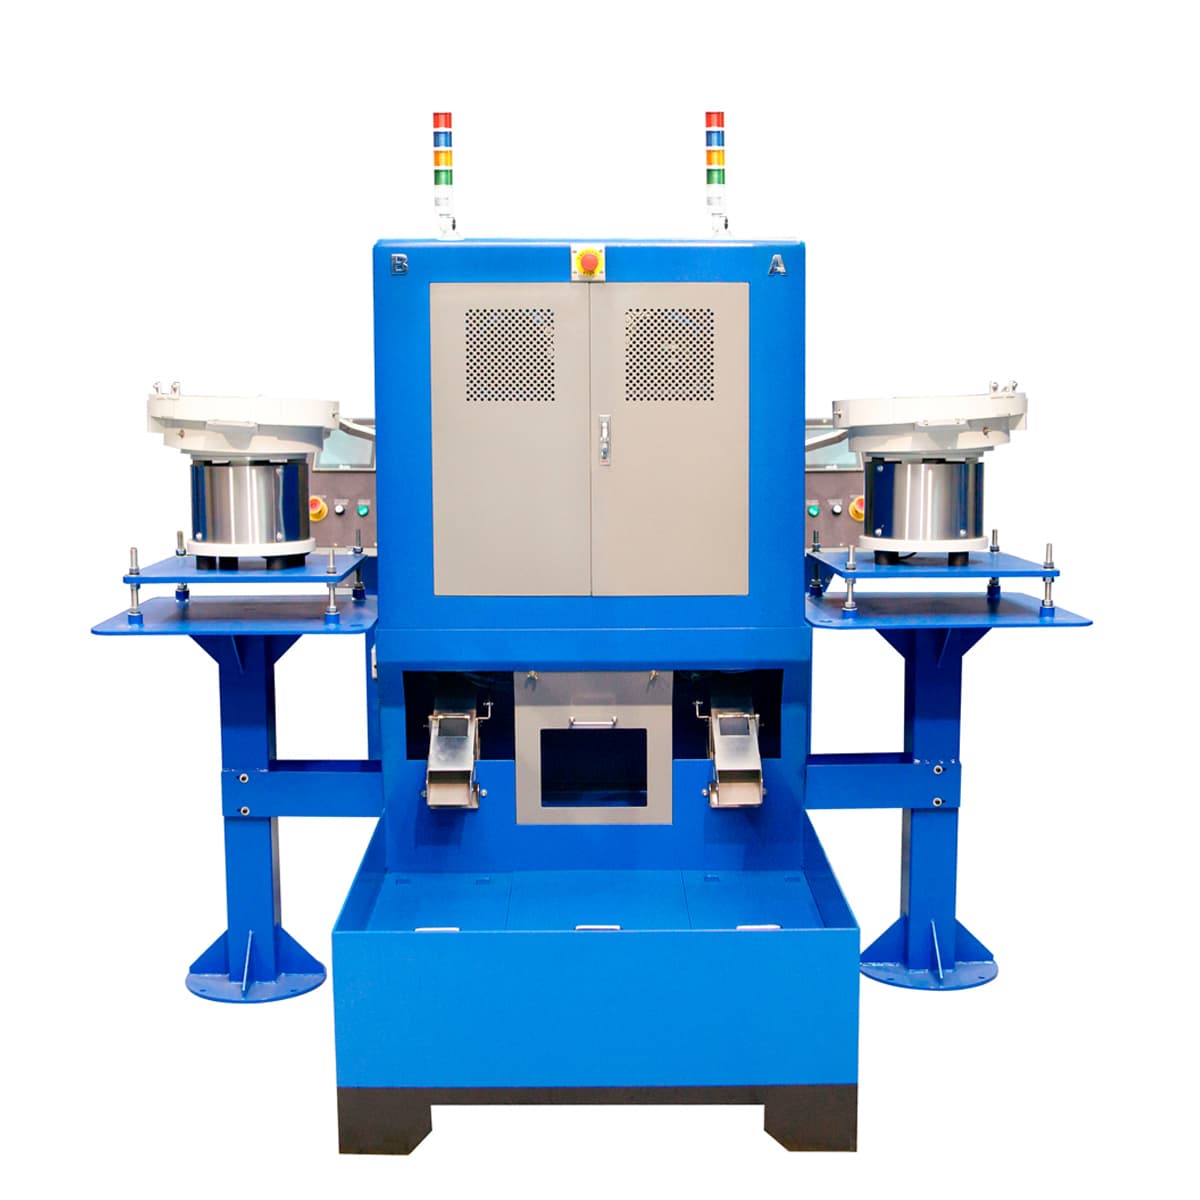 2-spindle tapping machine of shuttle-type